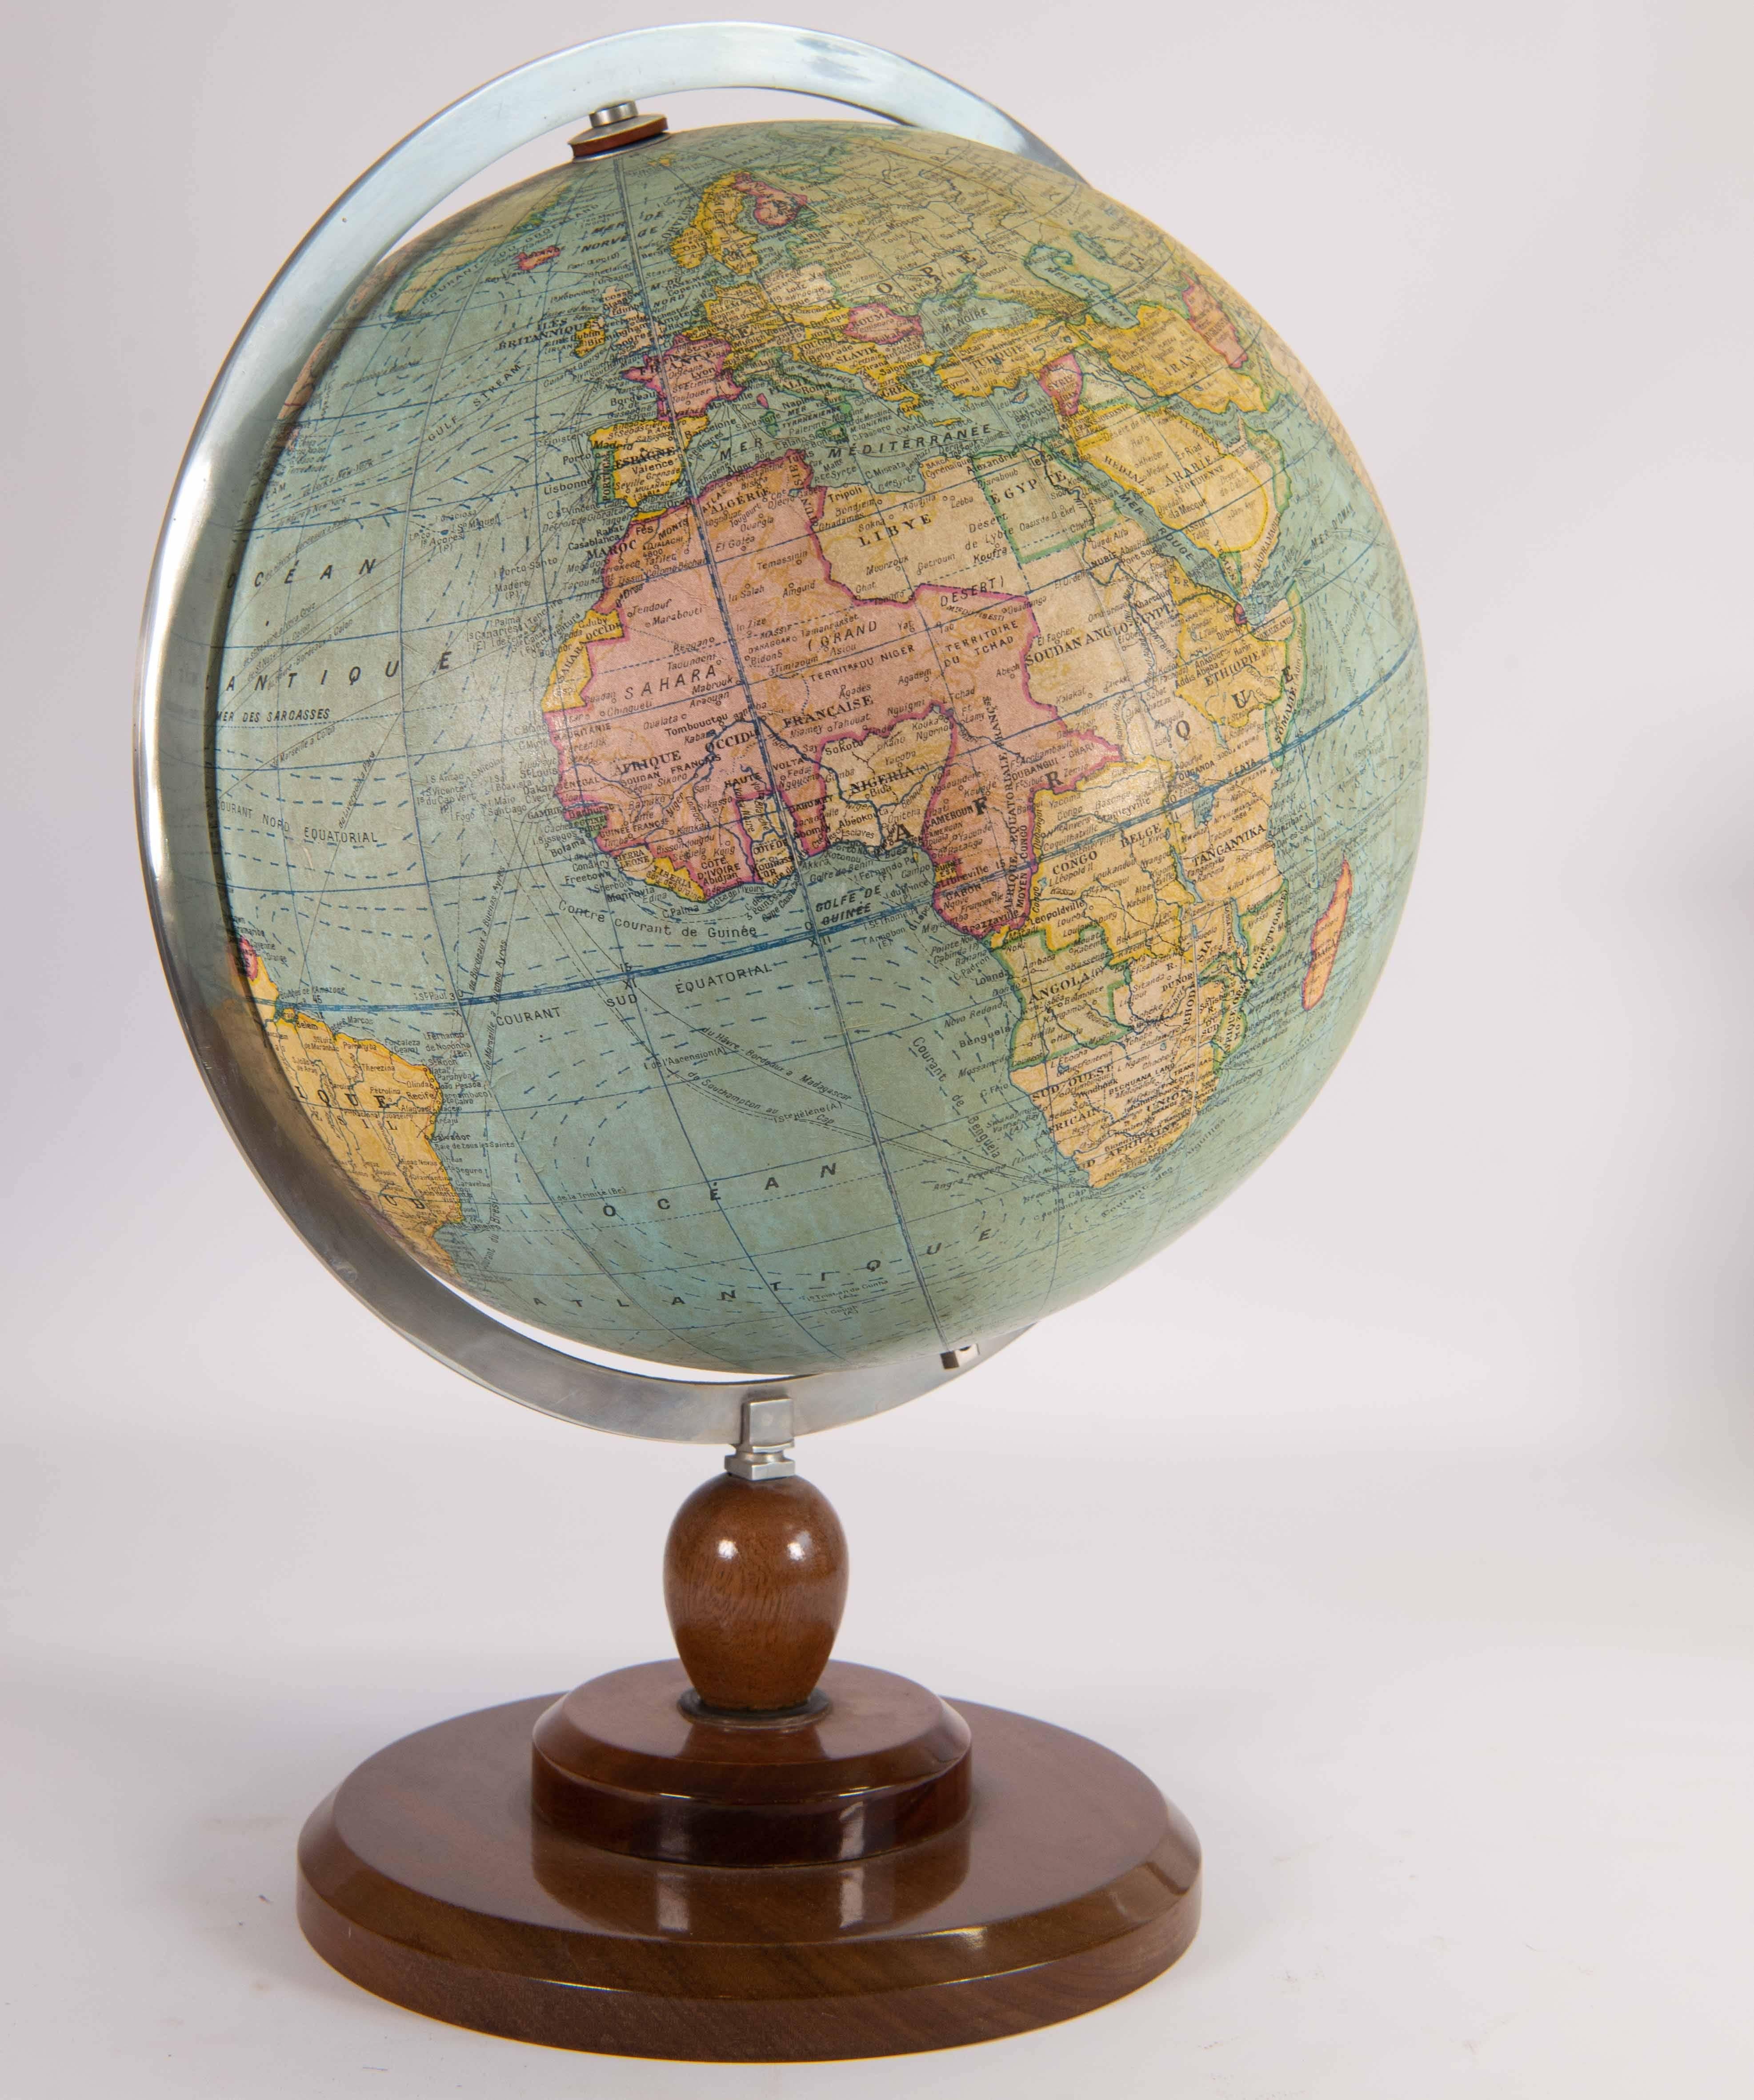 Globe displaying the world map on a 1:40 000 000 Meter scale. Made by Gerard Barrère et Thomas, circa 1950. 
Globe rotates within metal ruler. Ruler rotates on wood base. 
Language on the globe is French. 

Please note: This globe is available